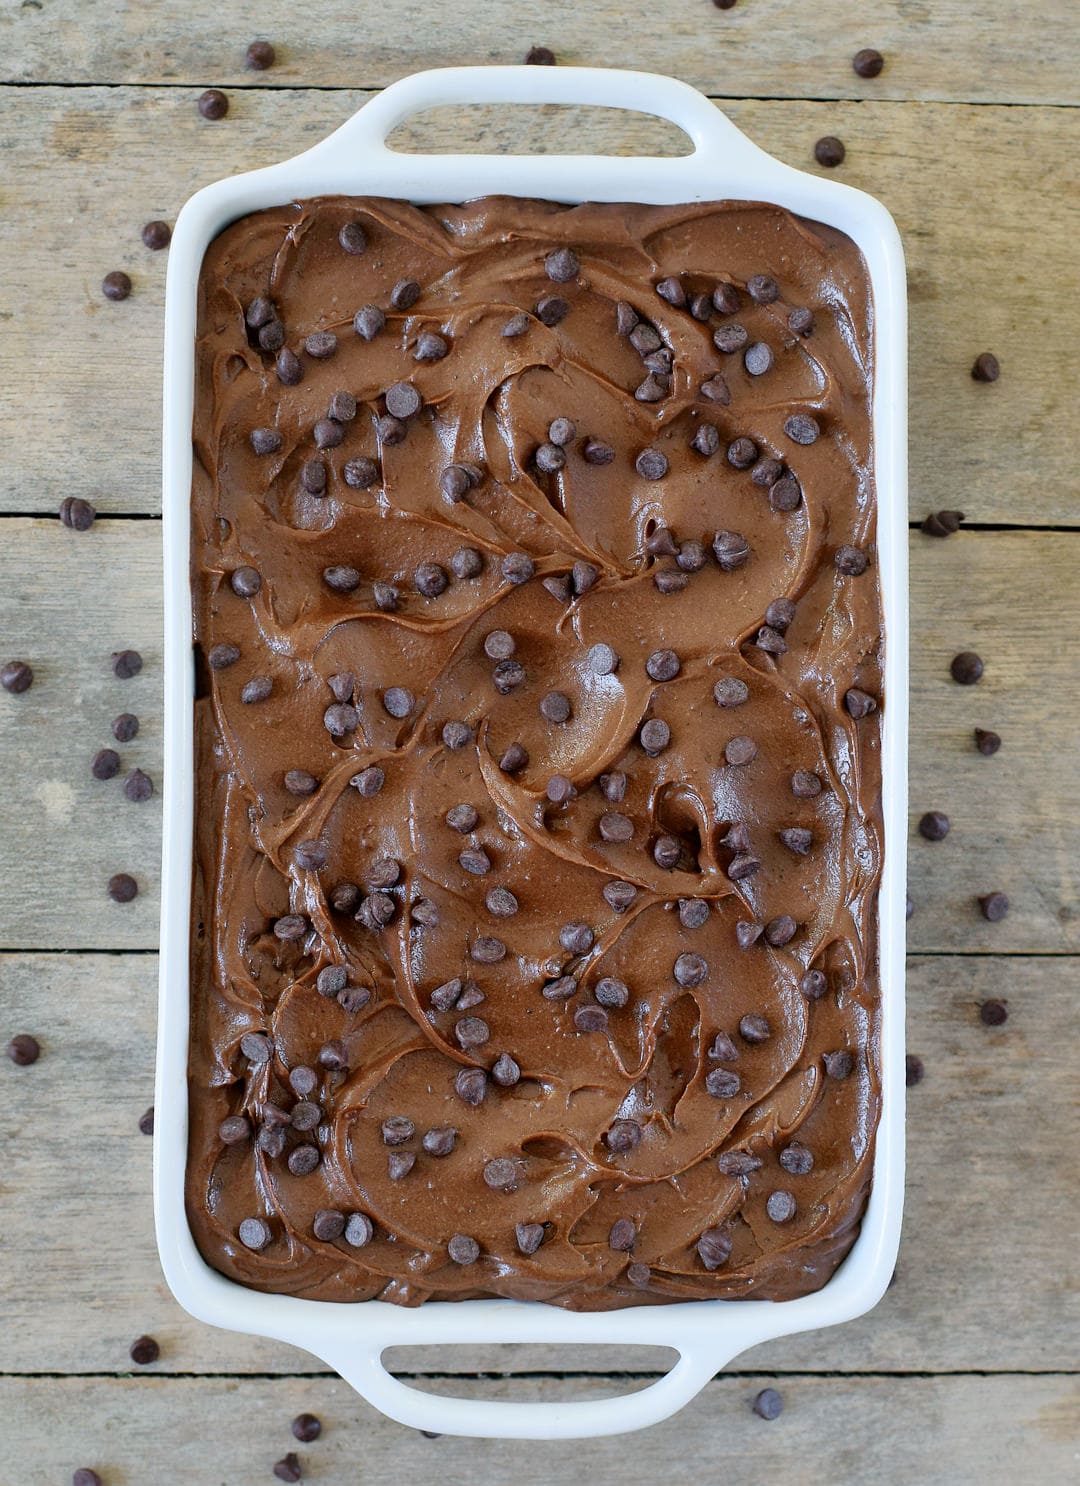 Chocolate batter in a baking dish with sweet potato frosting and mini chocolate chips